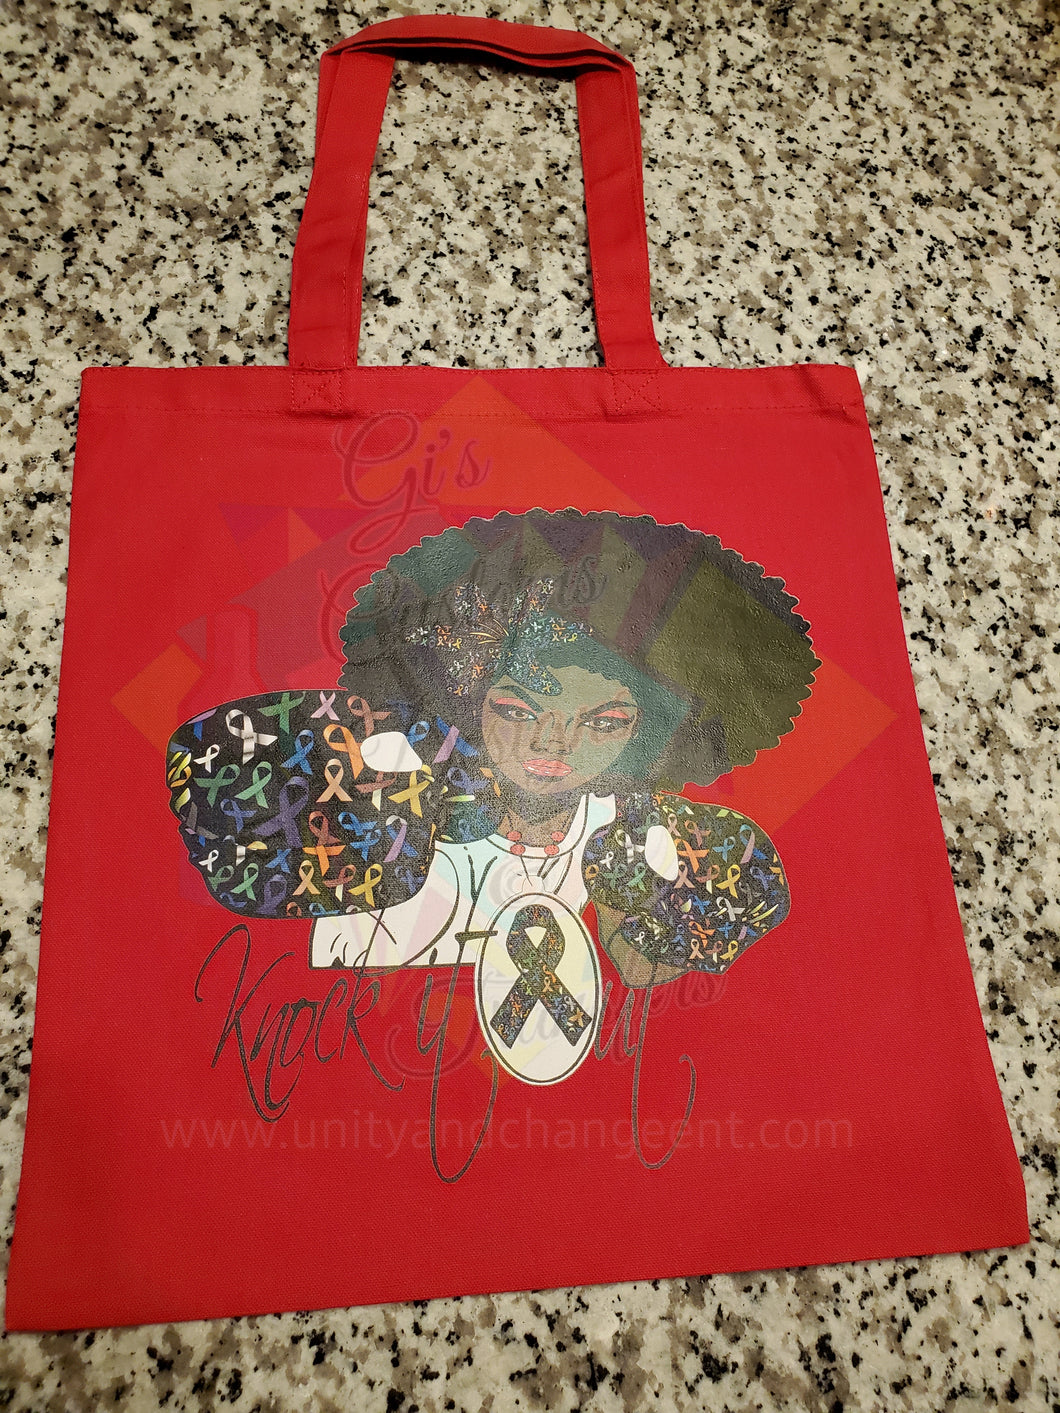 Knock It Out In All Colors Tote Bag